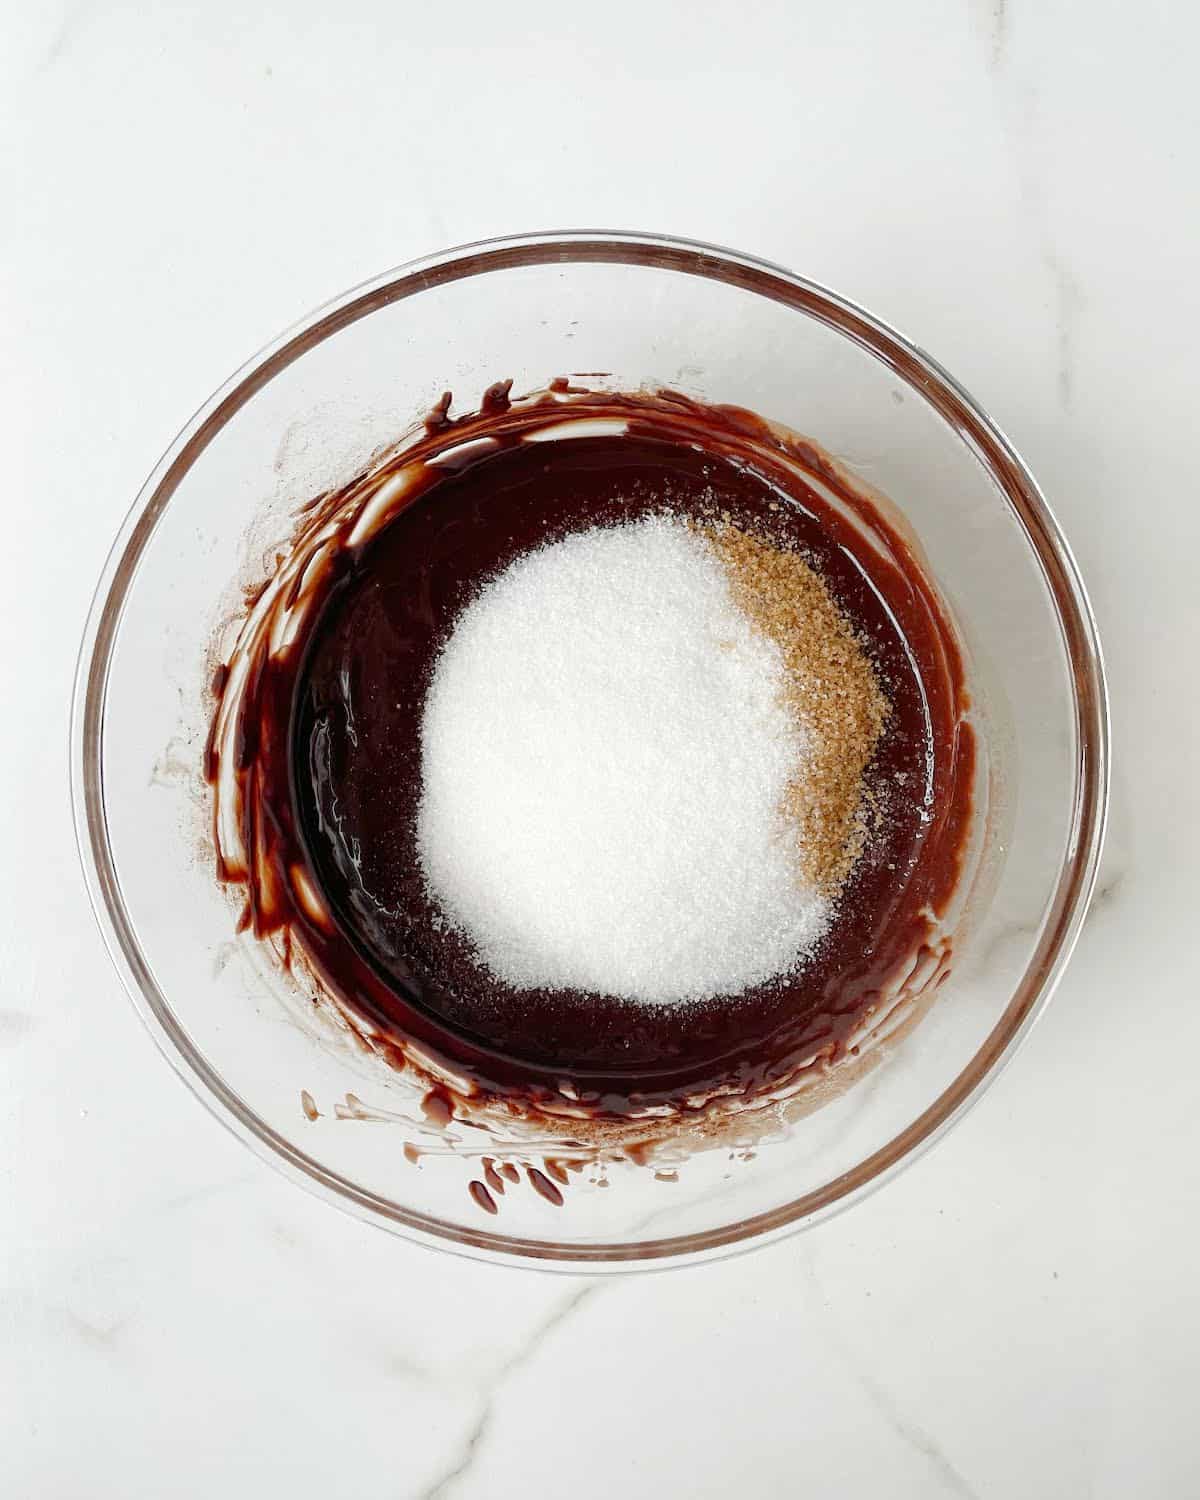 Sugars added to brownie batter in a glass bowl. White marble surface.